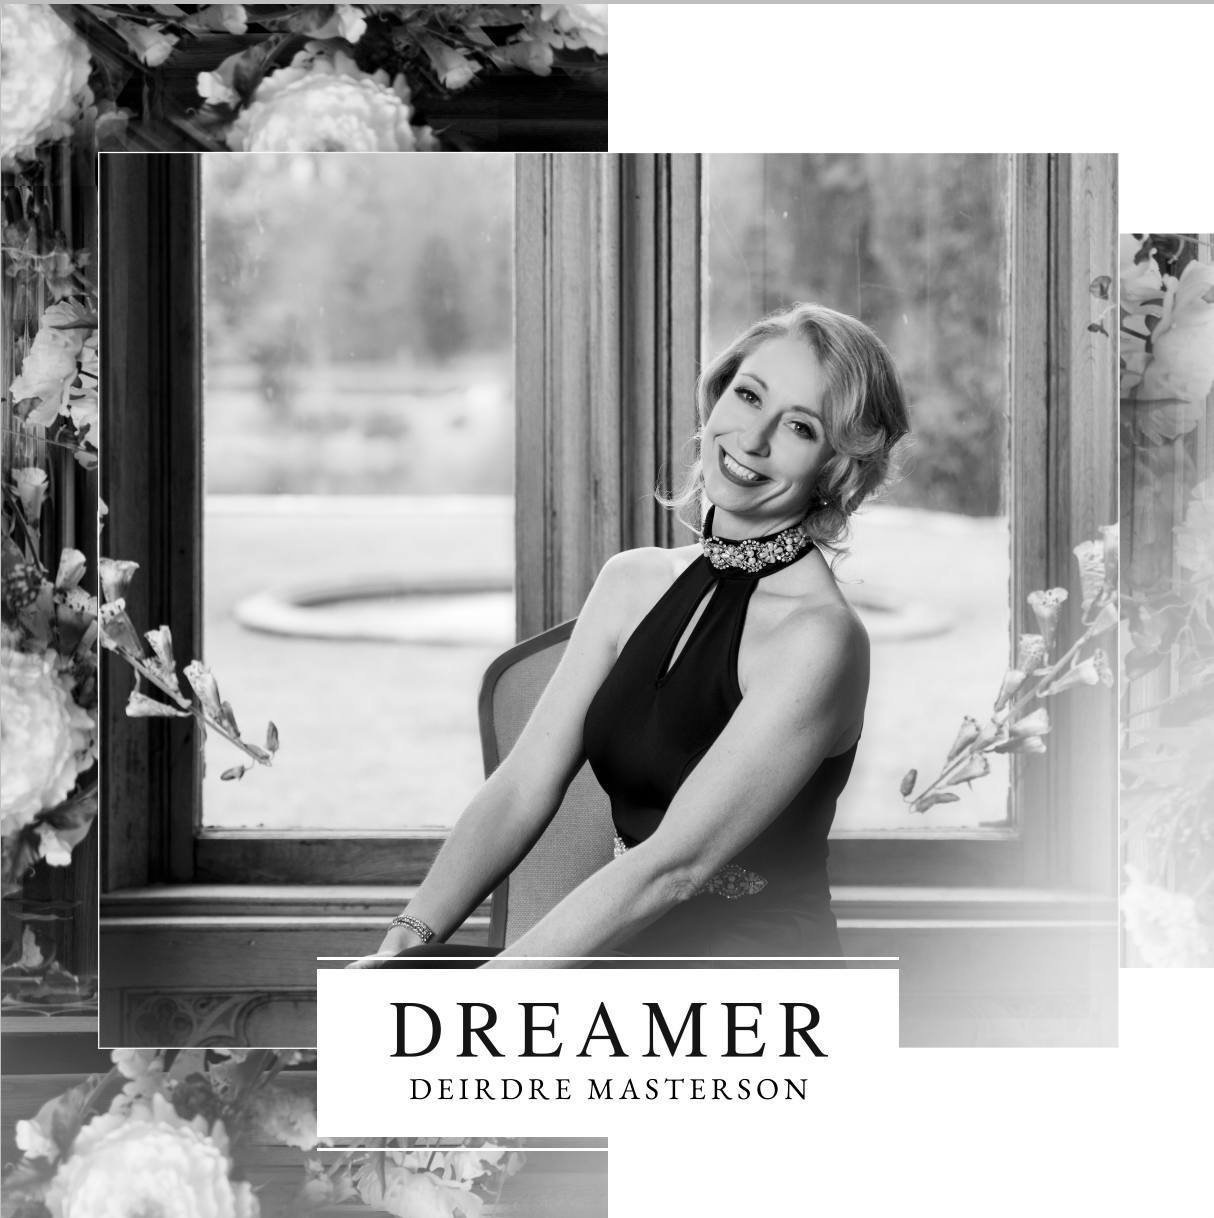 Dreamer - The Latest Single by Deirdre Masterson - Releasing August 19th on all your favourite streaming channels